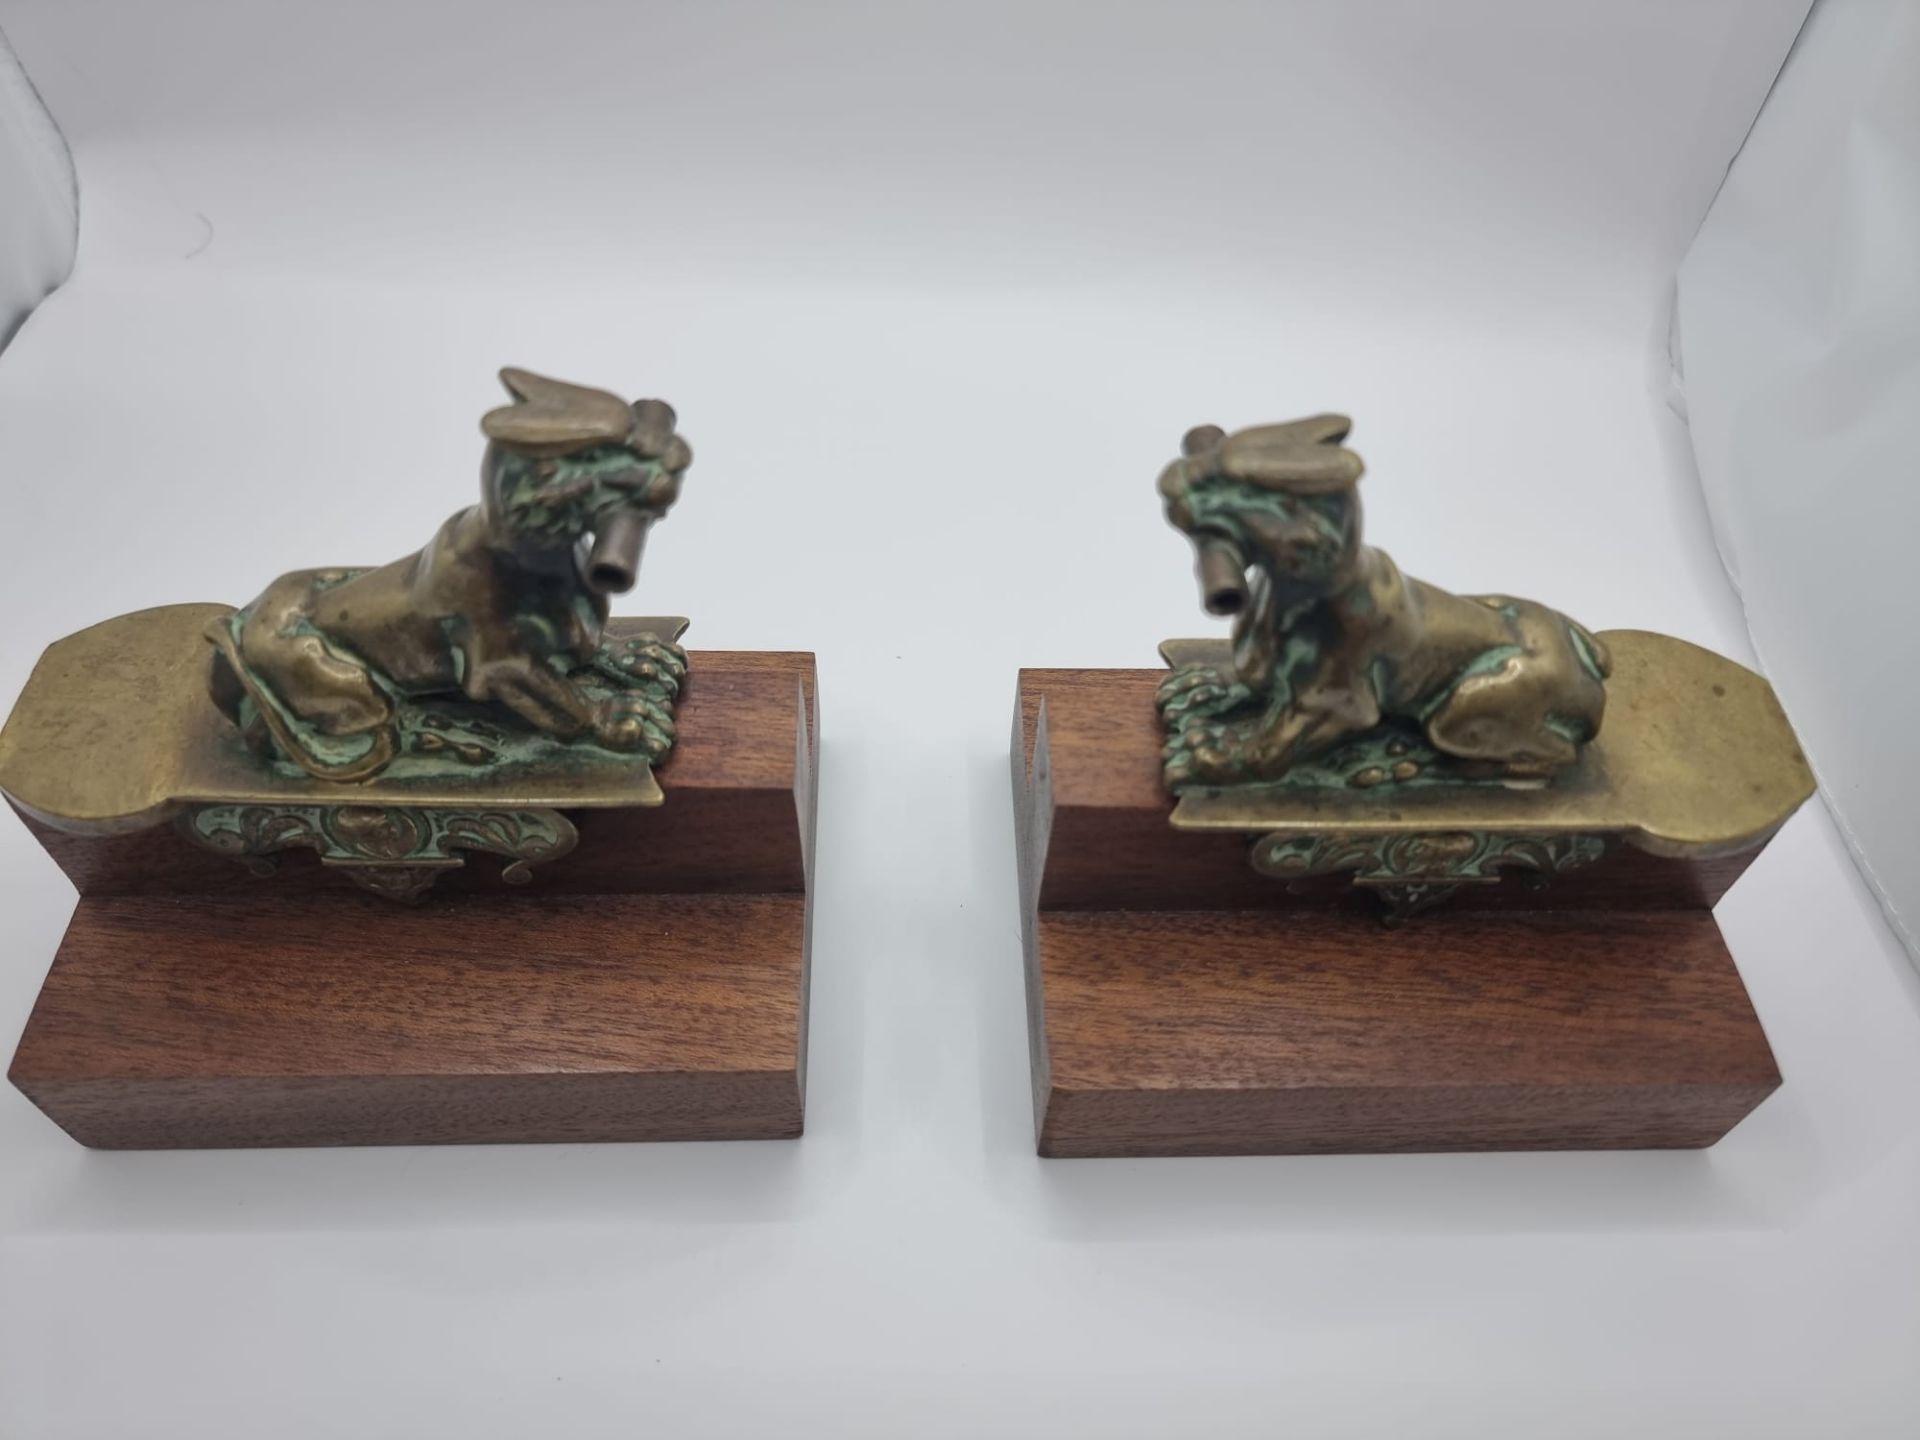 Pair Of 19th Century Decorative Bronze Lions later added to wooden plinth thus converted as Bookends - Image 2 of 10